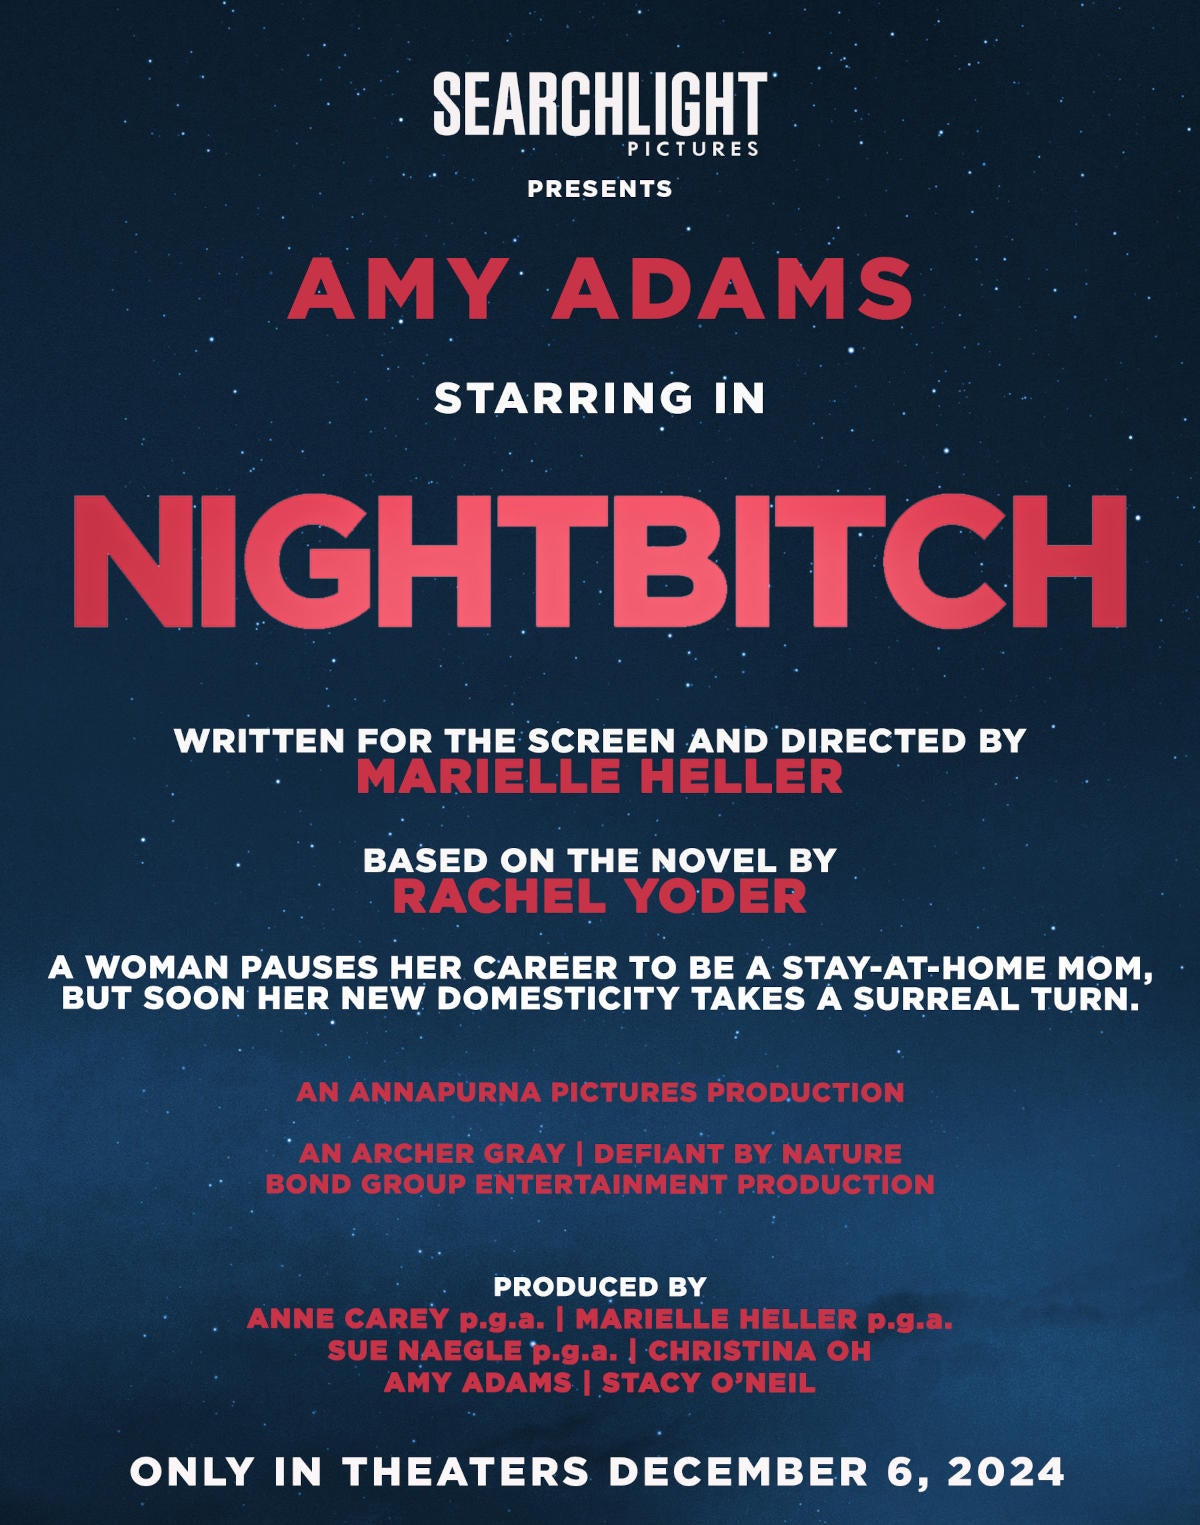 night-bitch-movie-announcement-2024-amy-adams-searchlight-pictures.jpg